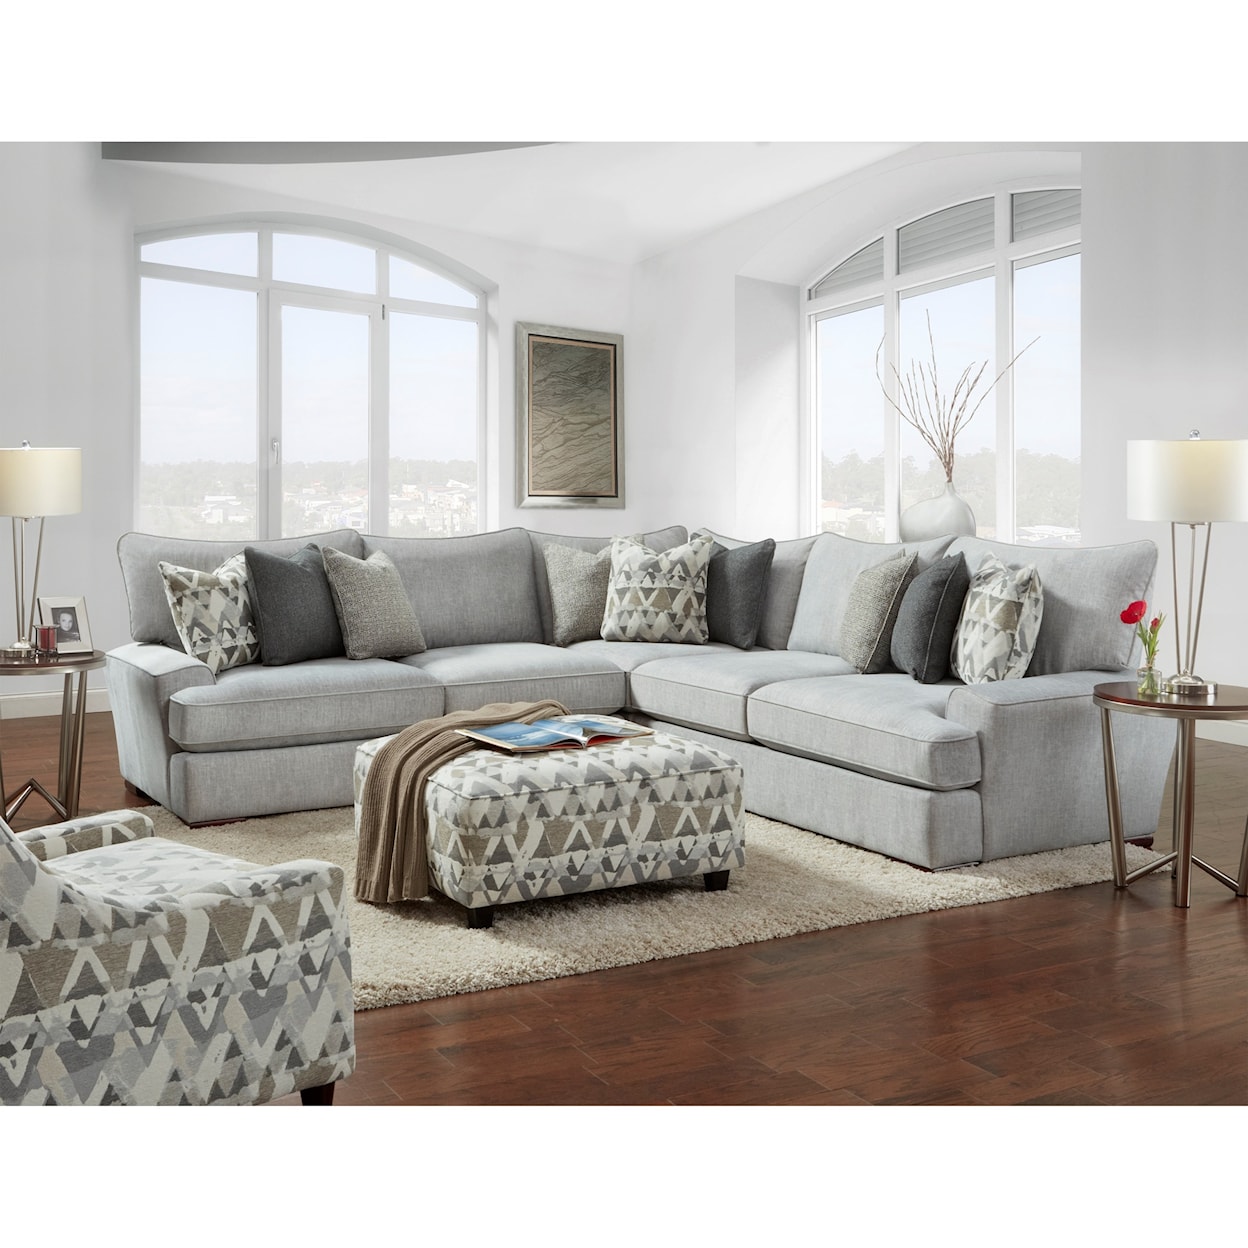 Fusion Furniture Alton Silver Stationary Living Room Group